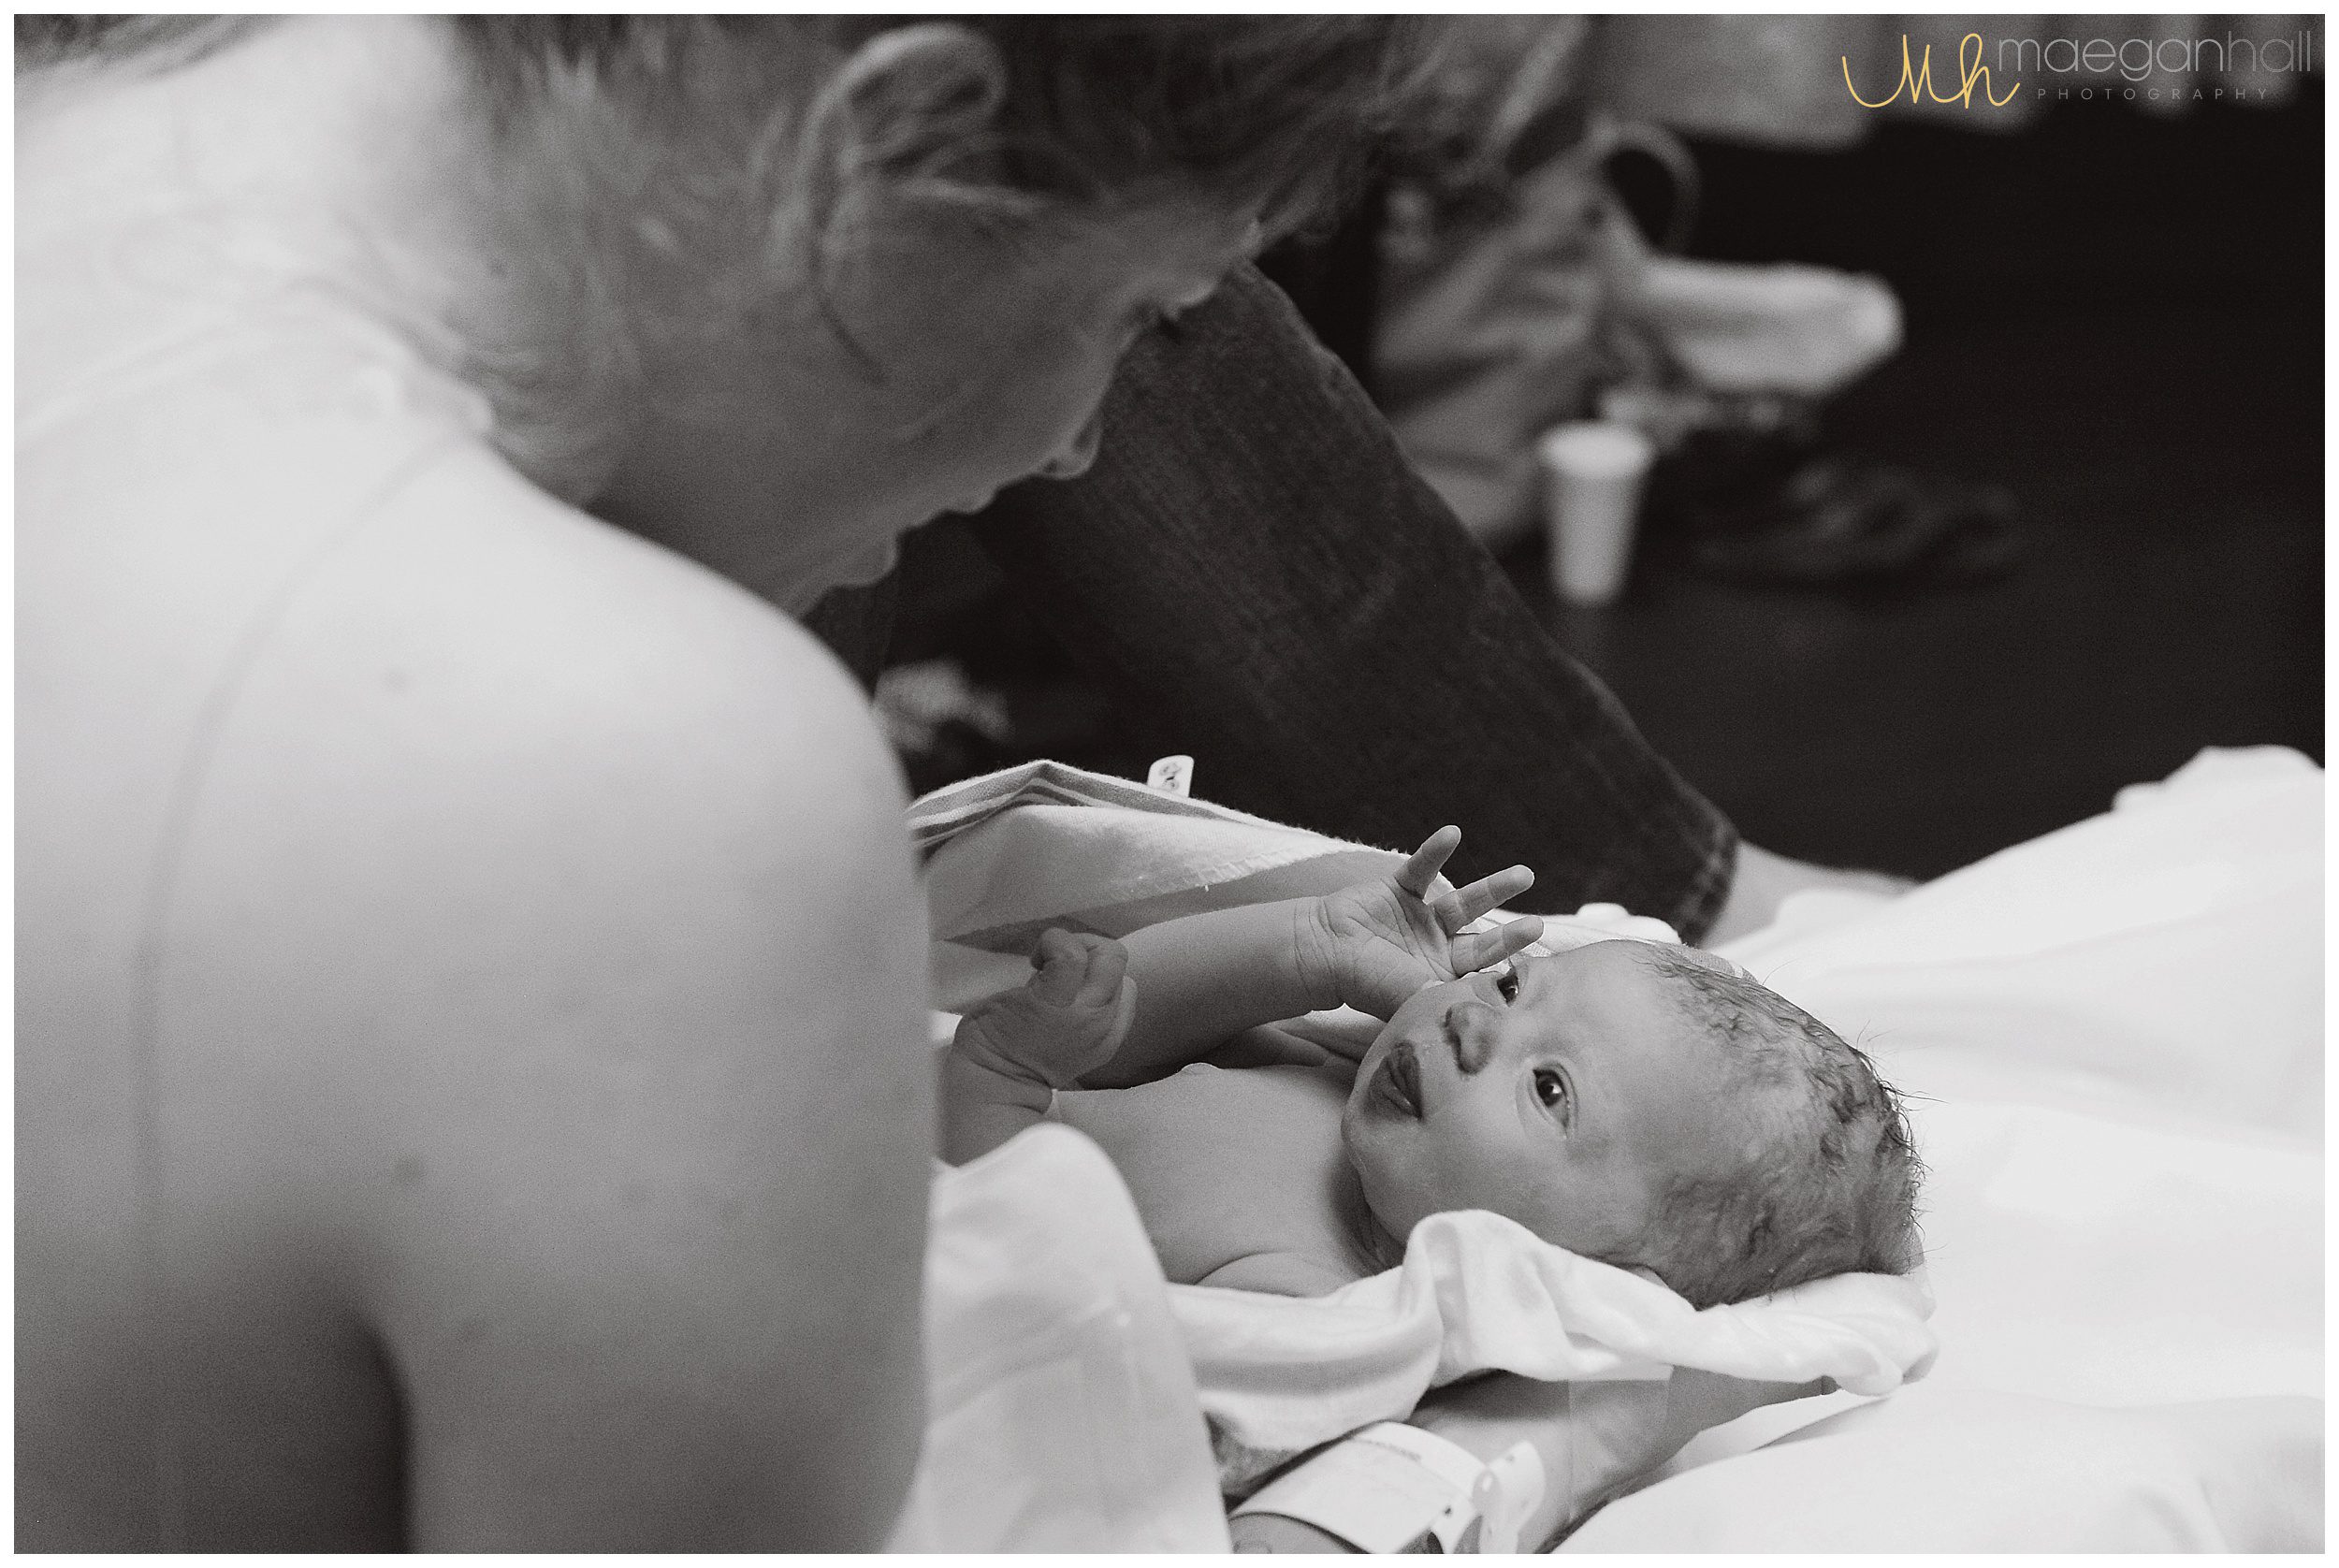 north-fulton-hospital-dad-catches-baby-atlanta-doula-birth-photographer-photography-photo-pictures_0001